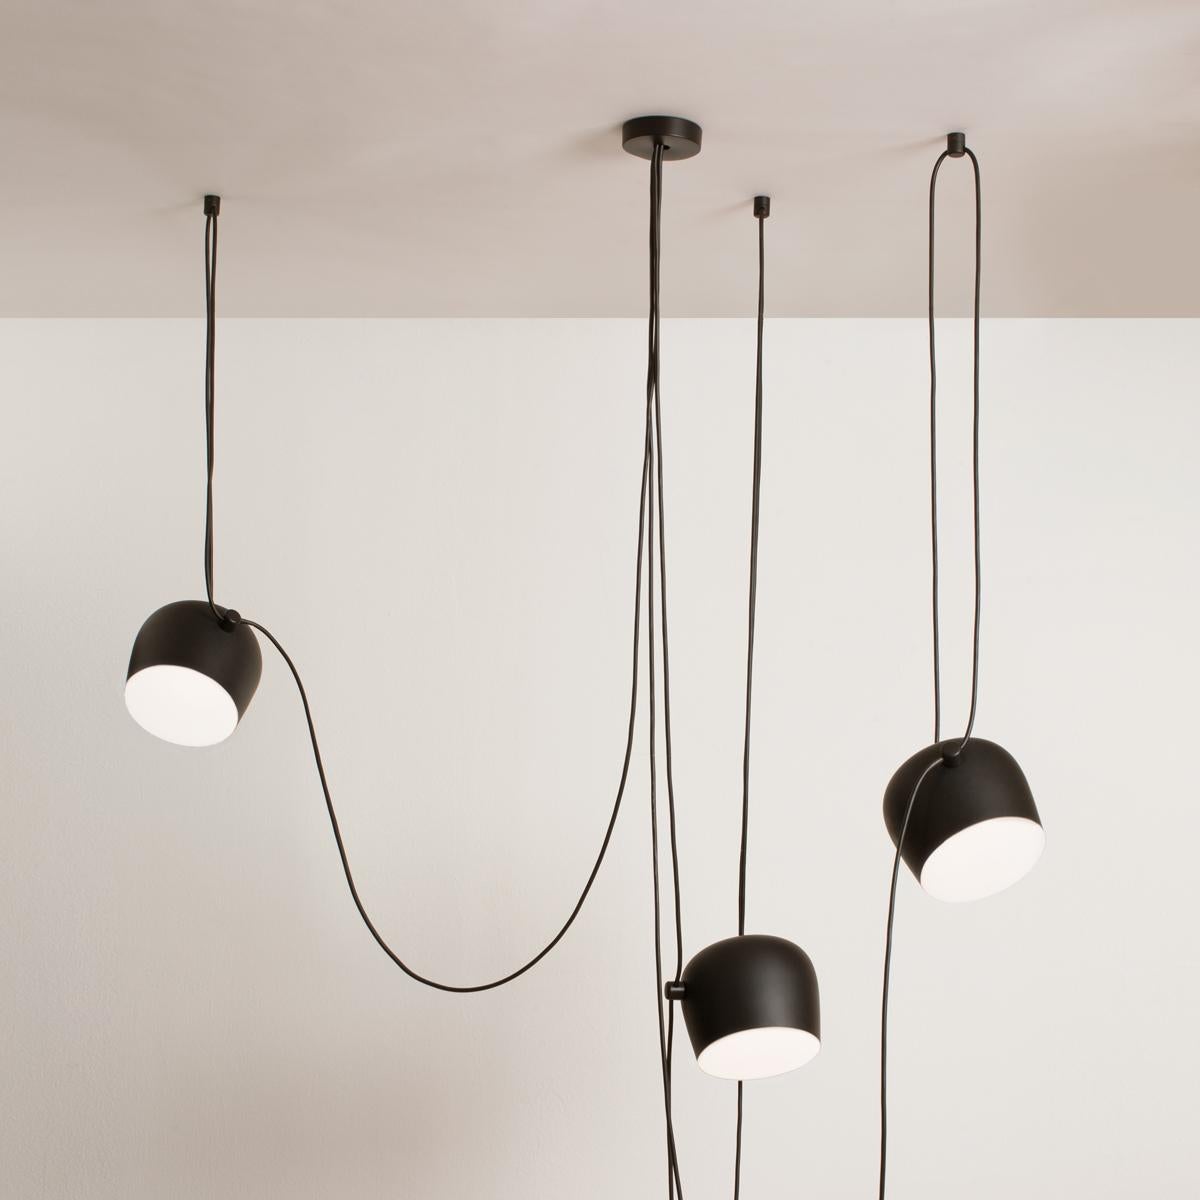 Contemporary Bouroullec Modern Black Plug-In Hanging Aim Pendant Light for FLOS, in stock